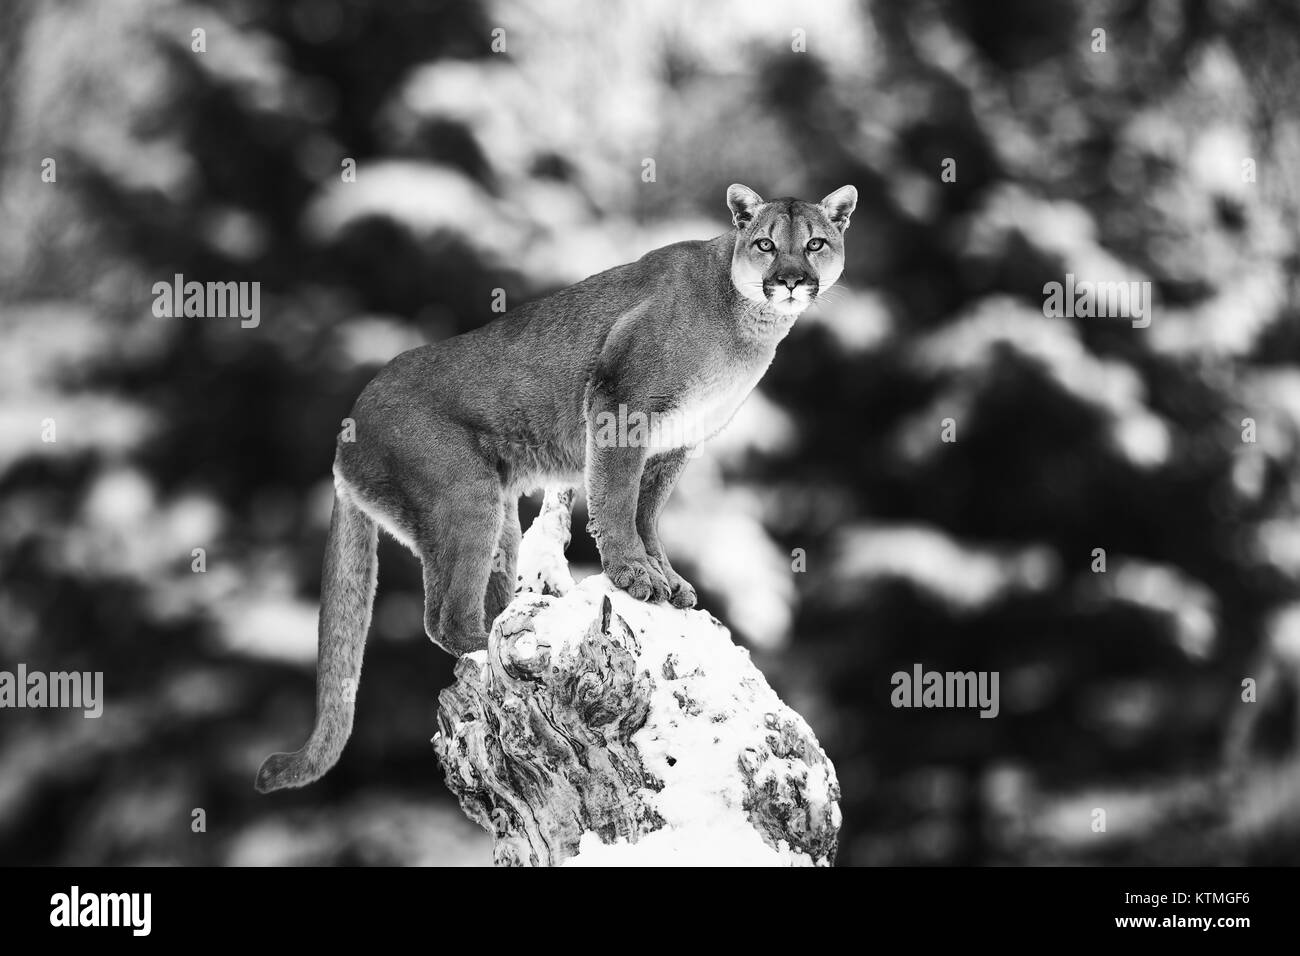 Puma look Black and White Stock Photos & Images - Alamy